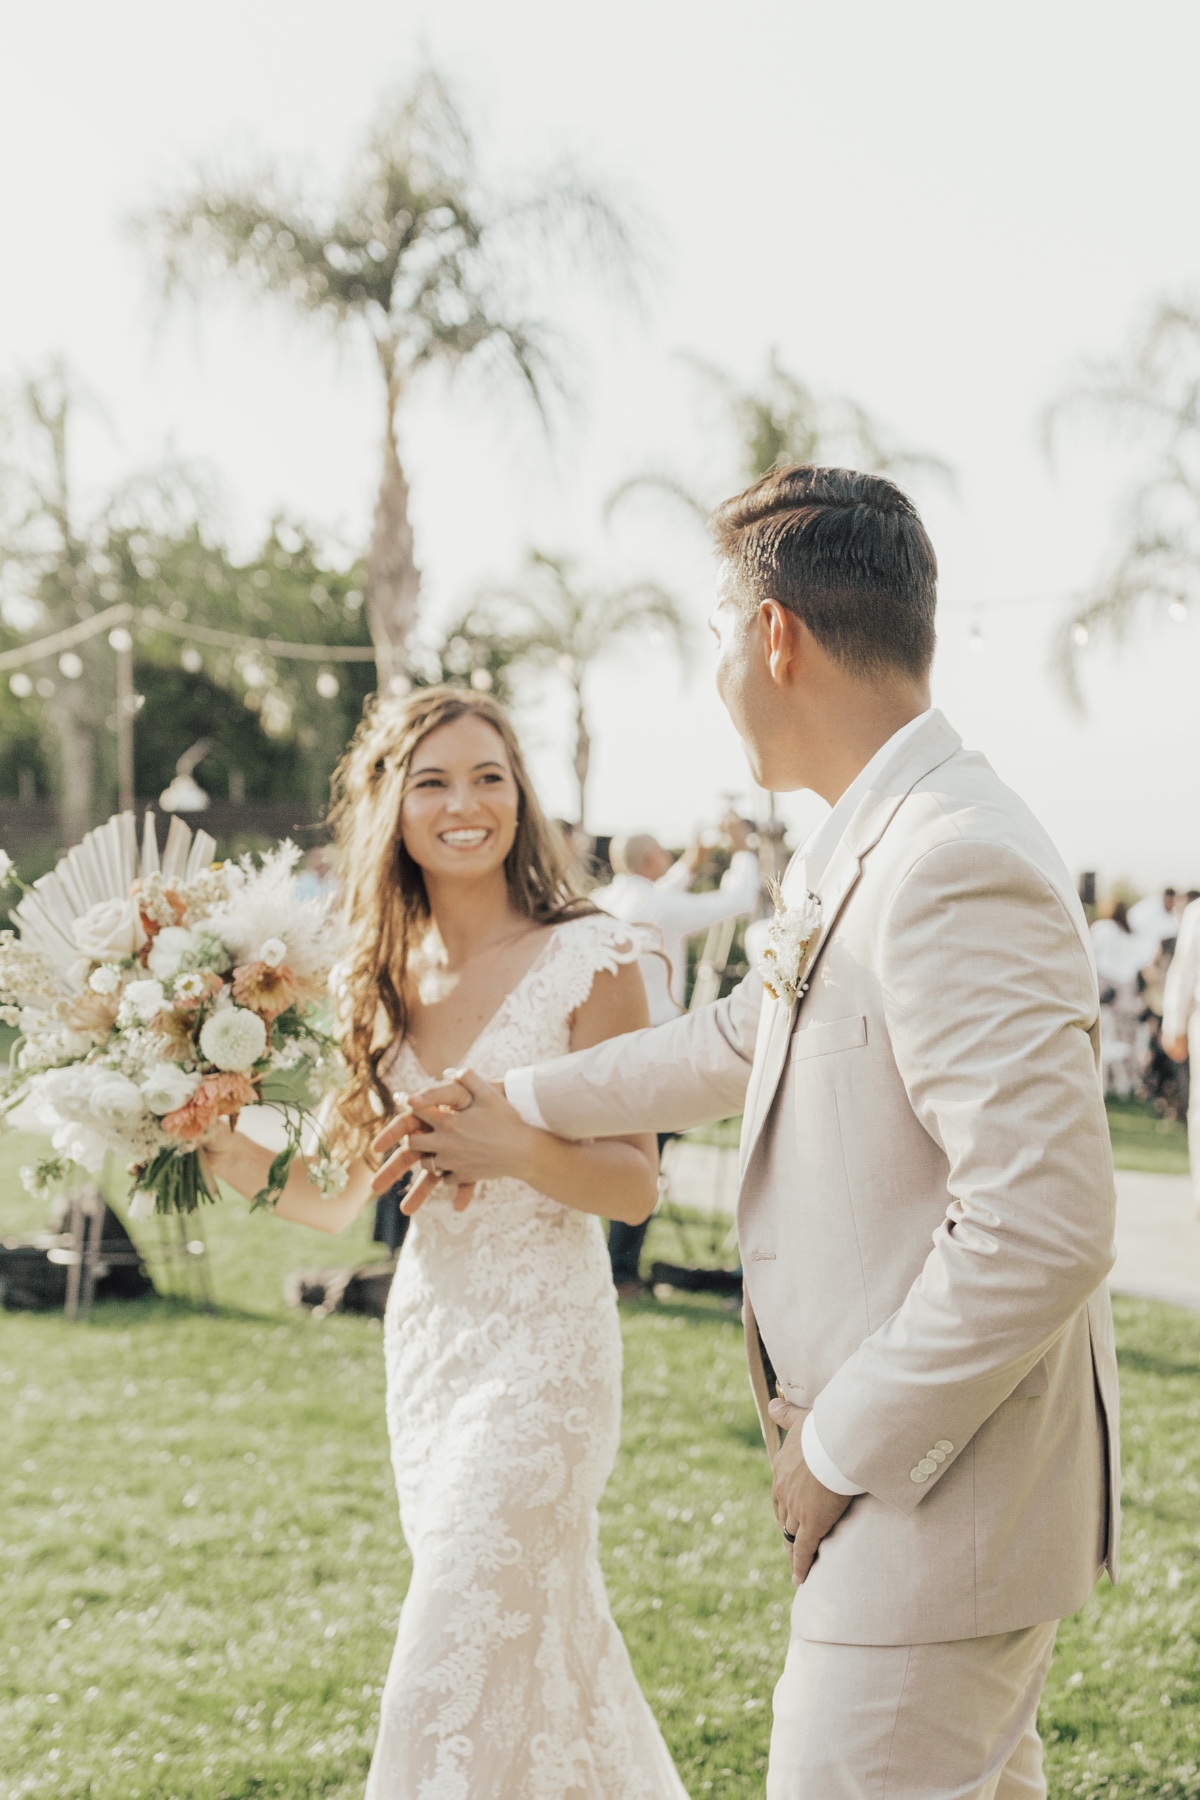 A City-wide Blackout Couldn't Stop This Sunny Desert Wedding